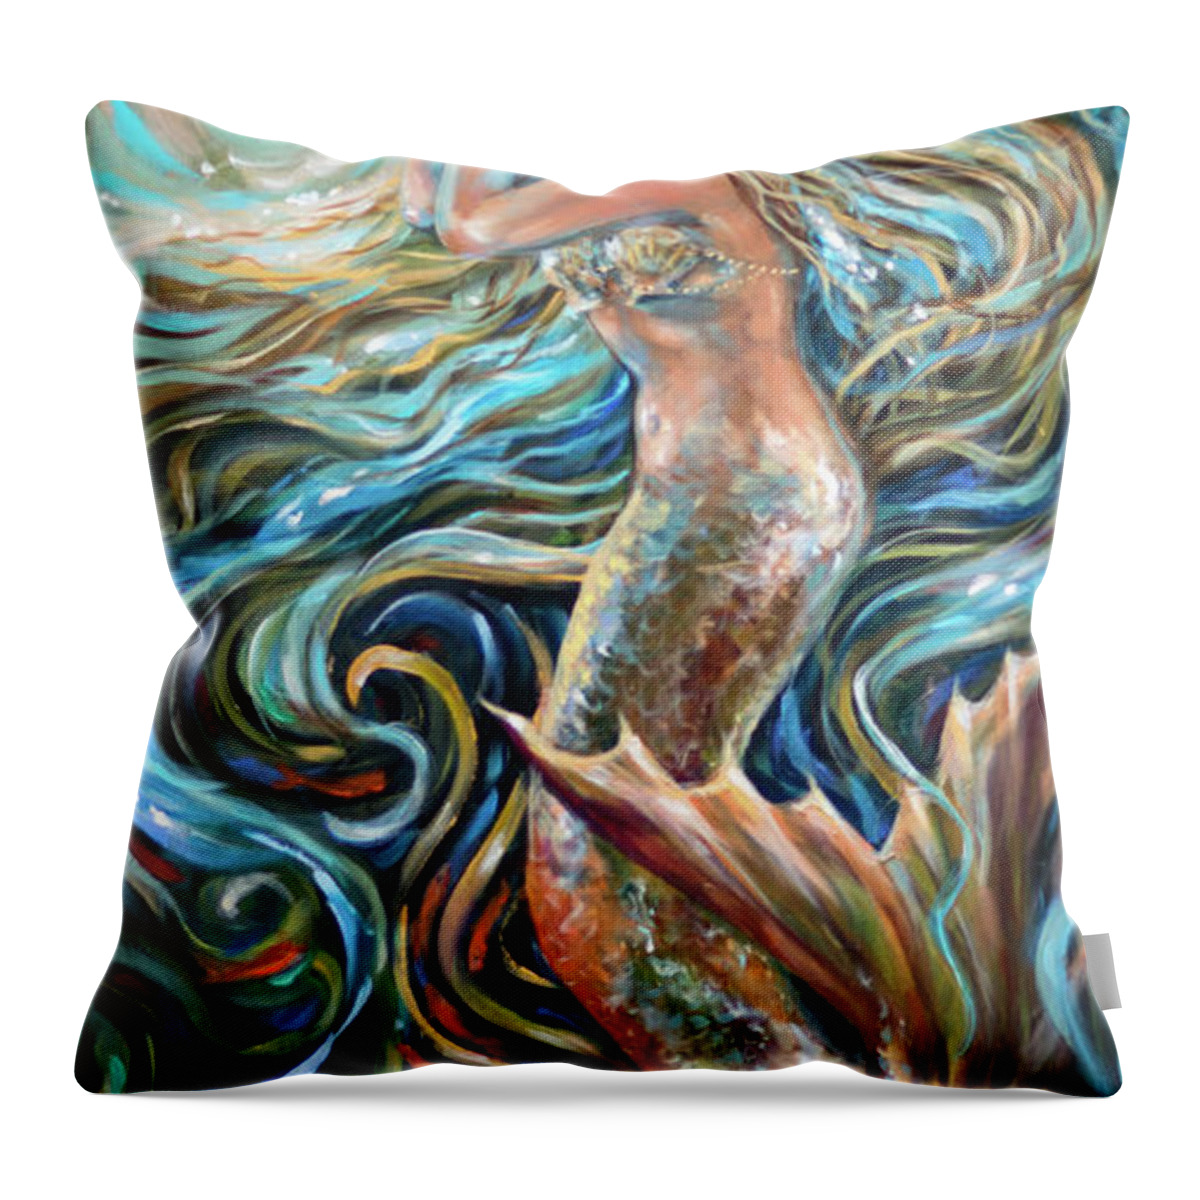 Ocean Throw Pillow featuring the painting Finding Treasure by Linda Olsen